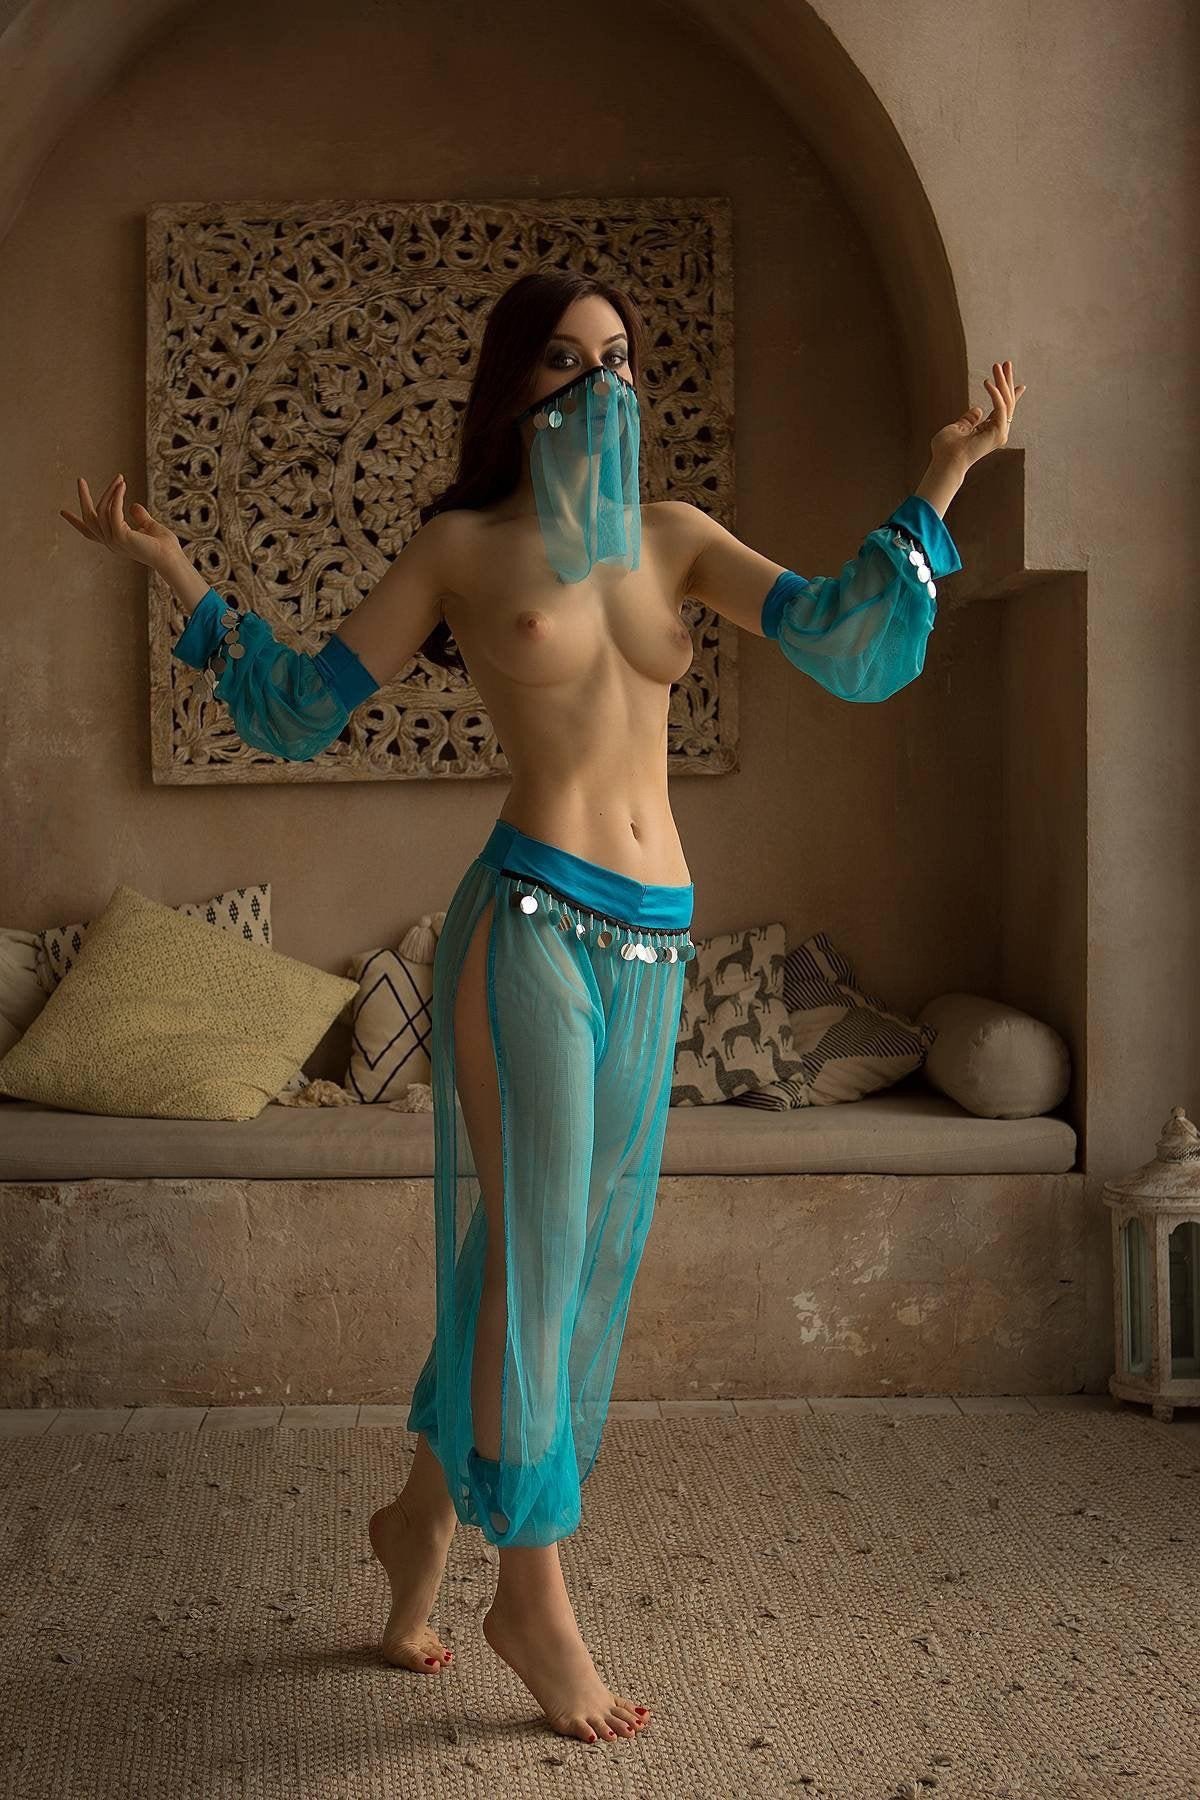 Nude Belly Dancers photo pic photo